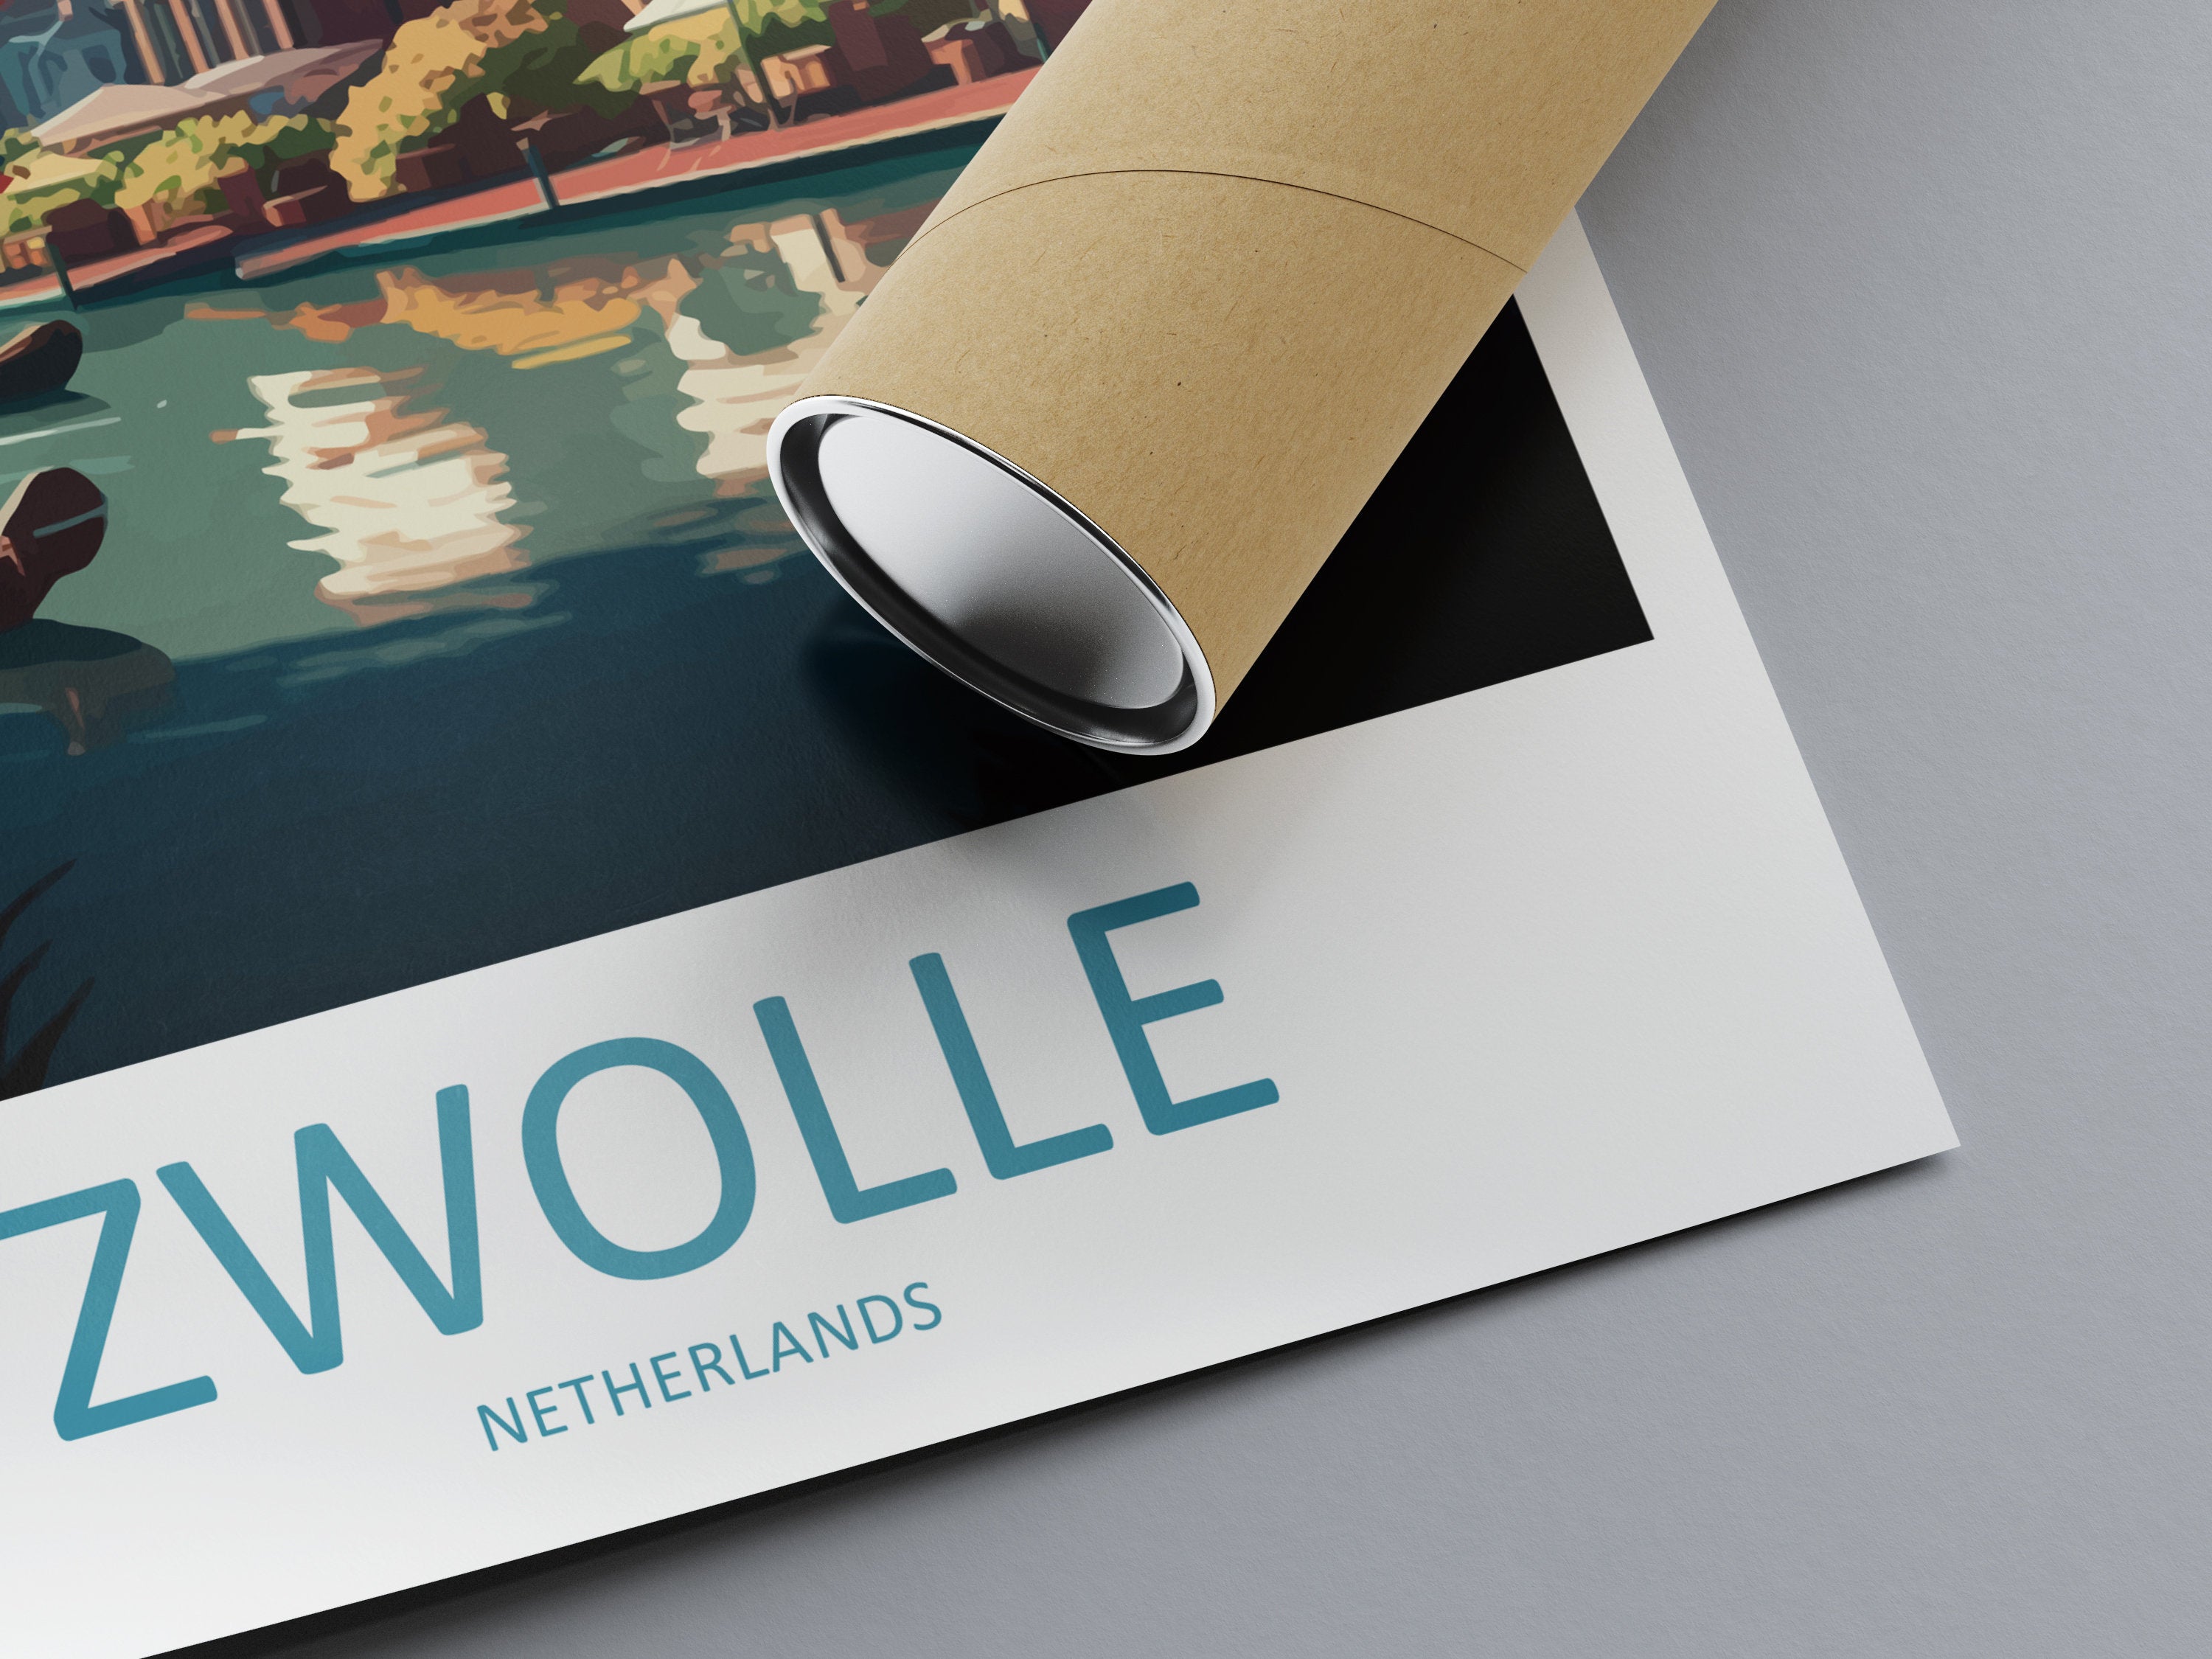 Zwolle Travel Print Wall Art Zwolle Wall Hanging Home Décor Zwolle Gift Art Lovers Netherlands Art Lover Gift Zwolle Travel Art